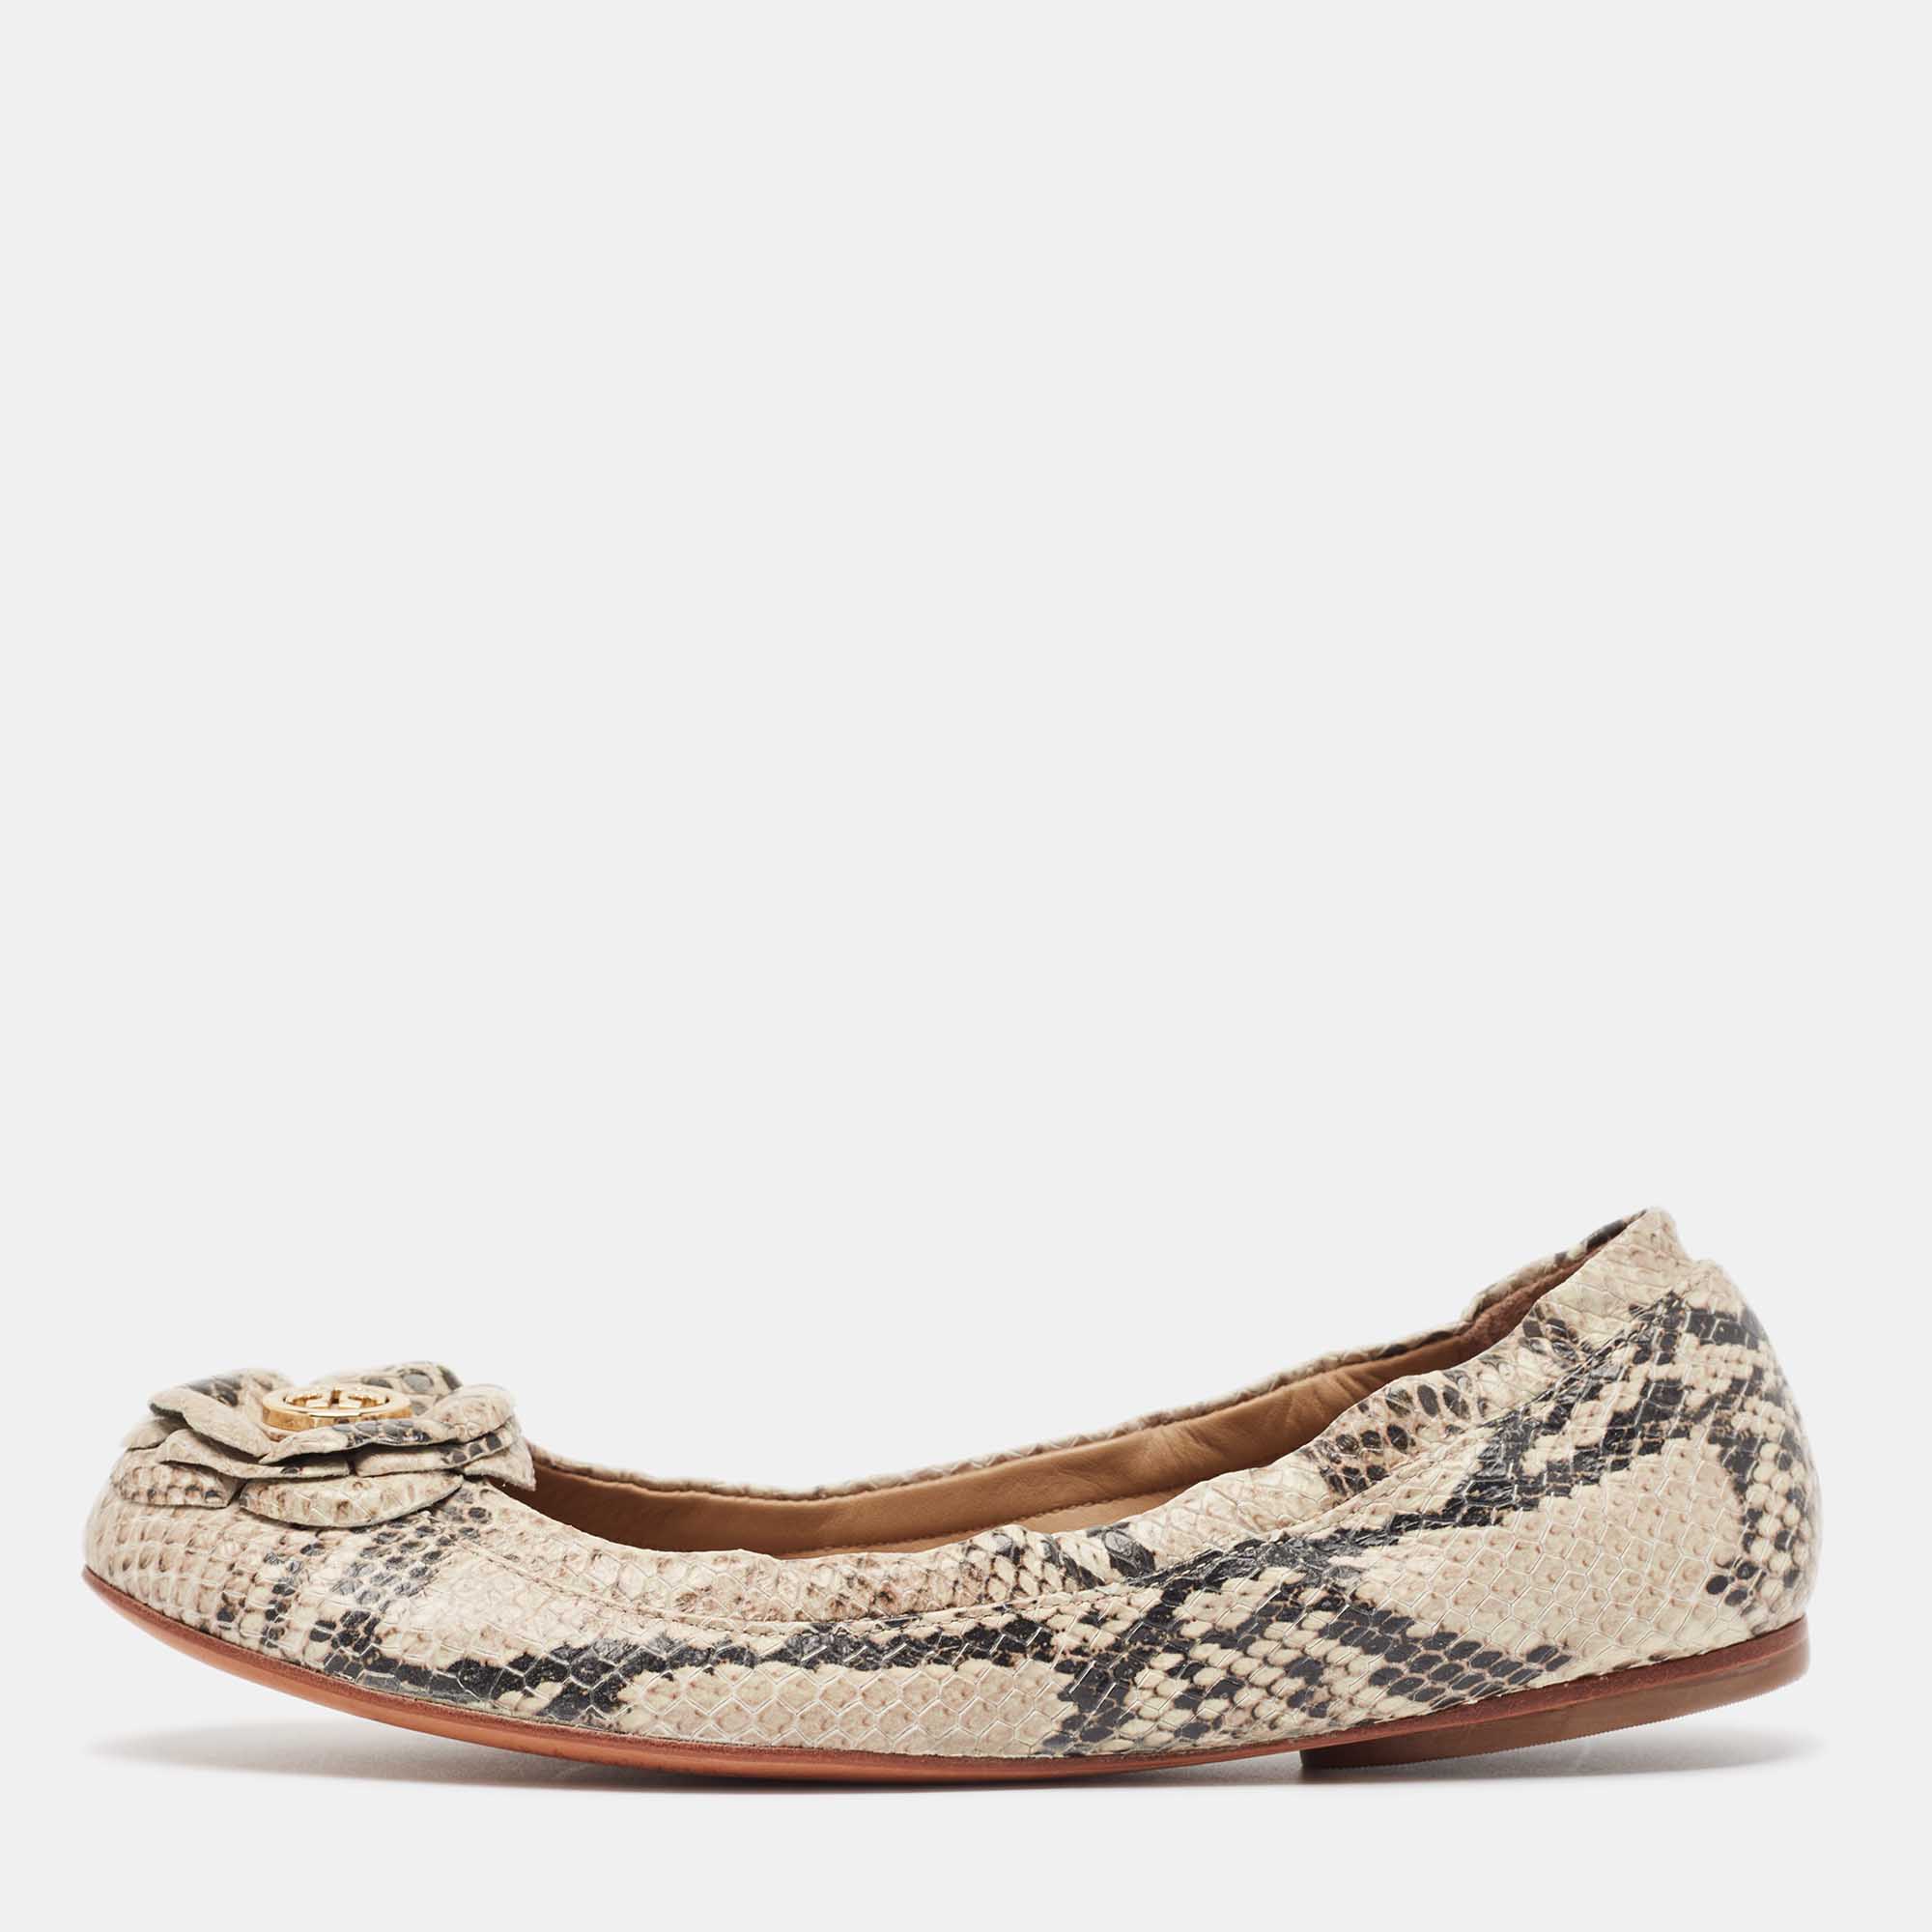 

Tory Burch Beige/Black Python Embossed Leather Scrunch Ballet Flats Size